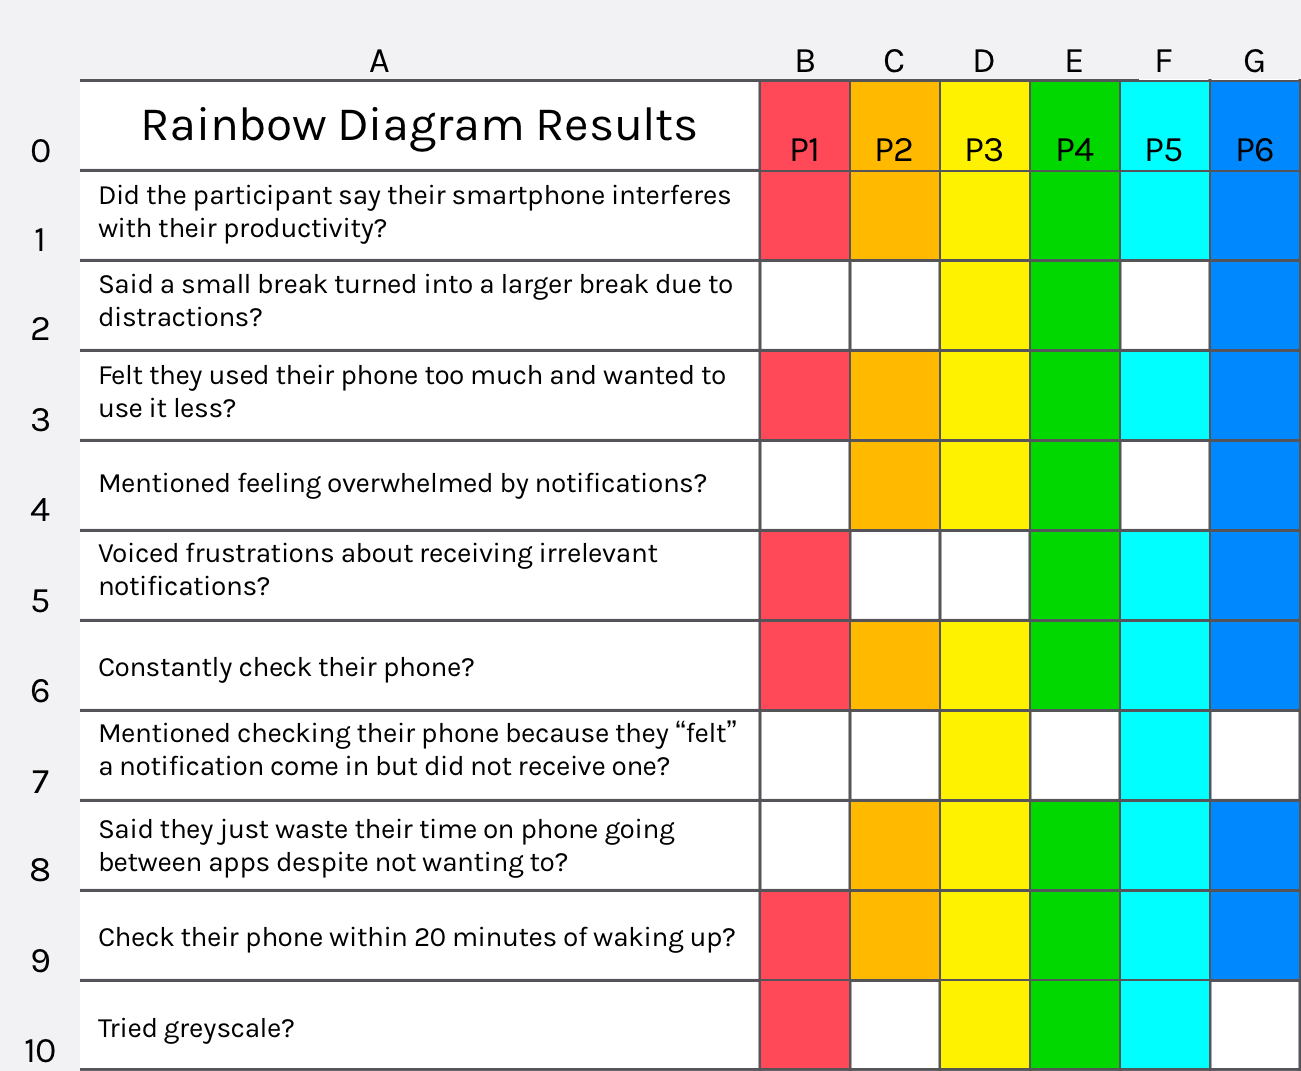 Rainbow Diagram of the Results of the Interviews